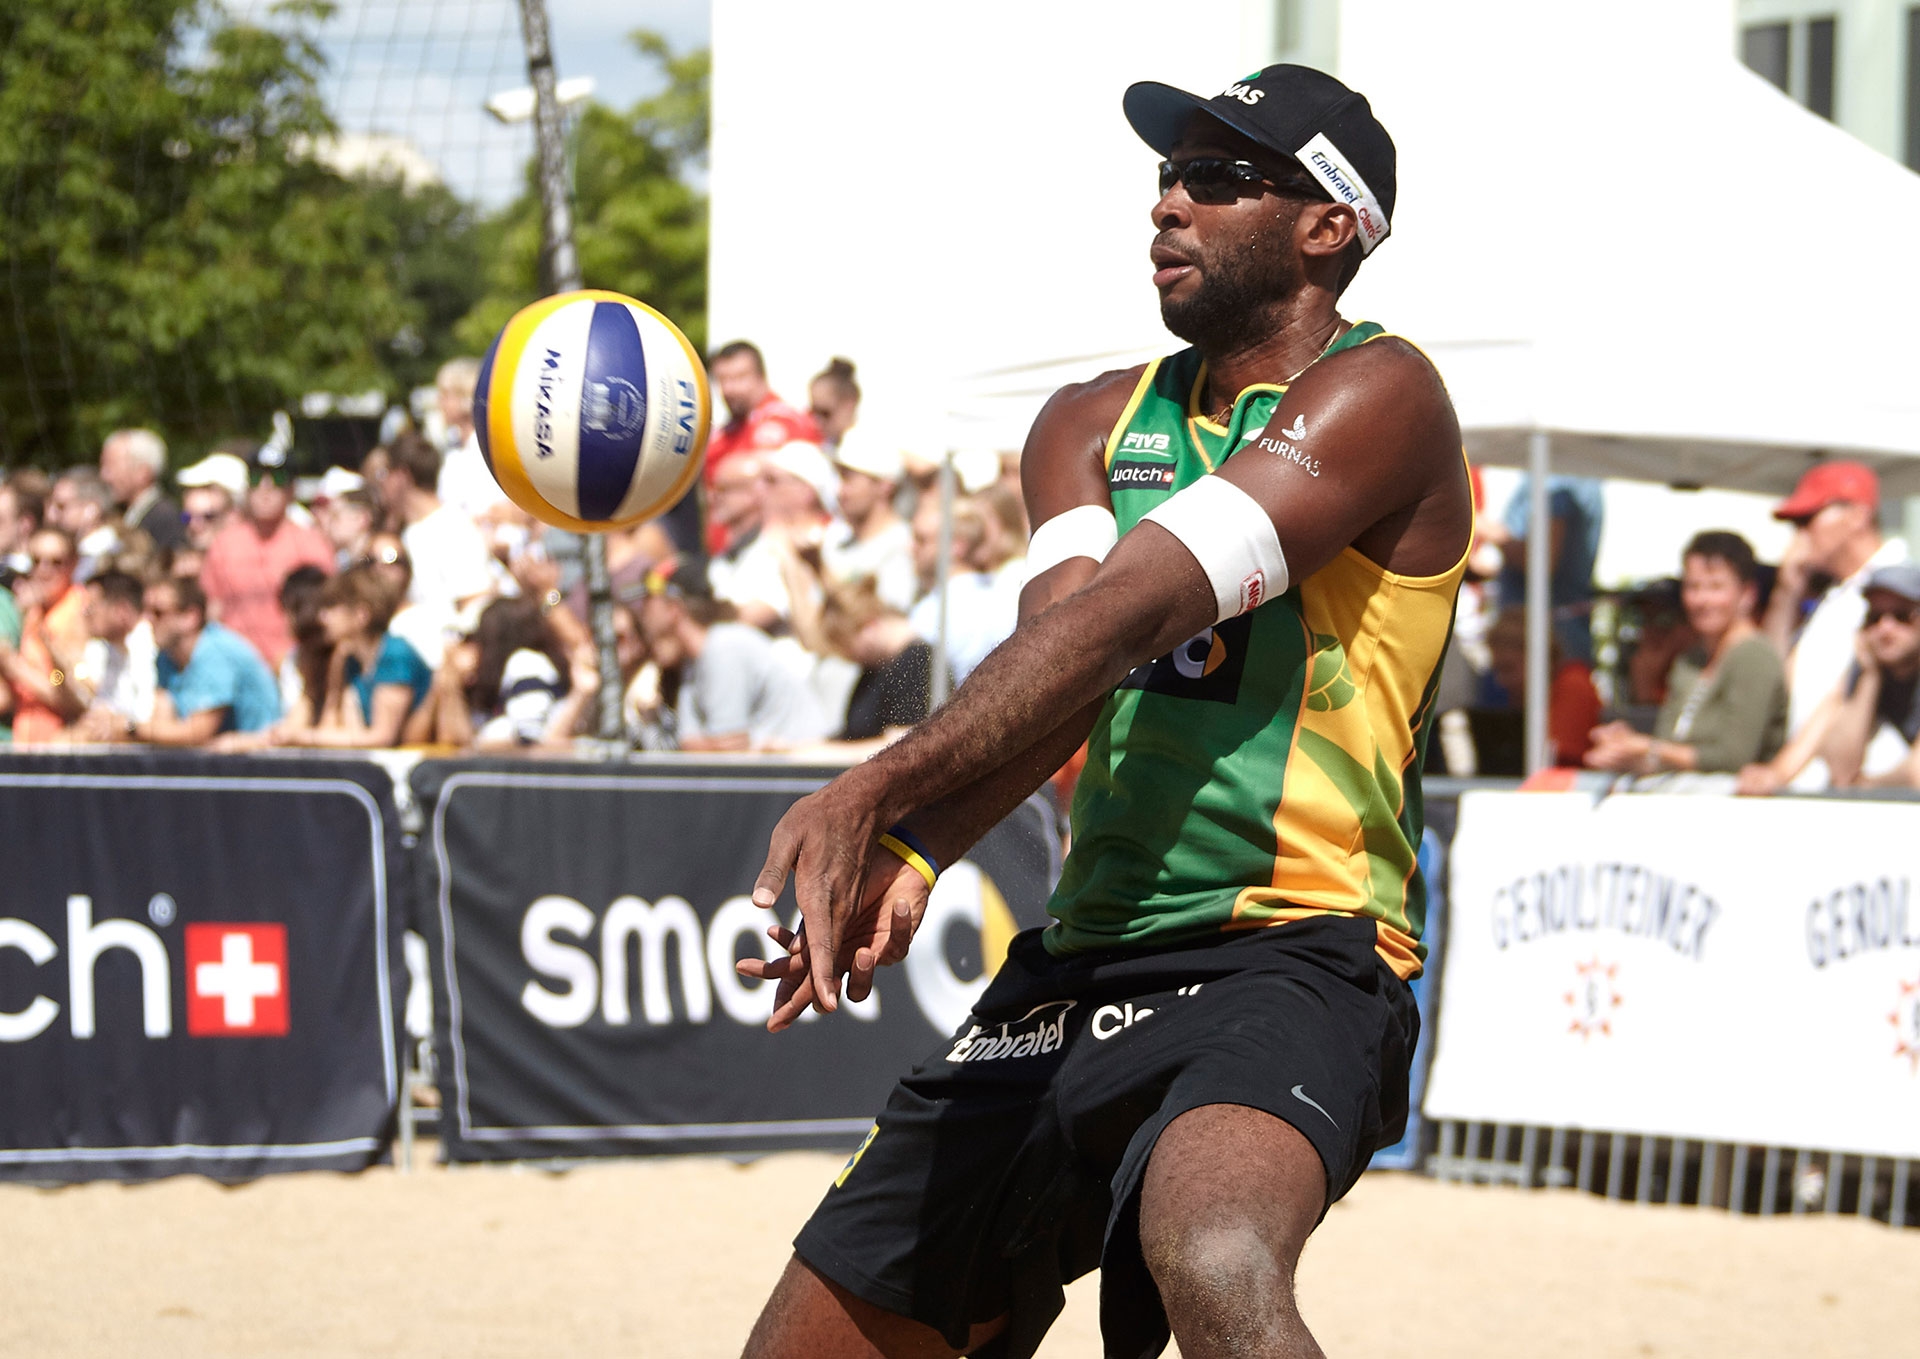 Big-serving Evandro Gonçalves was in brilliant form again. Photocredit: Mike Ranz